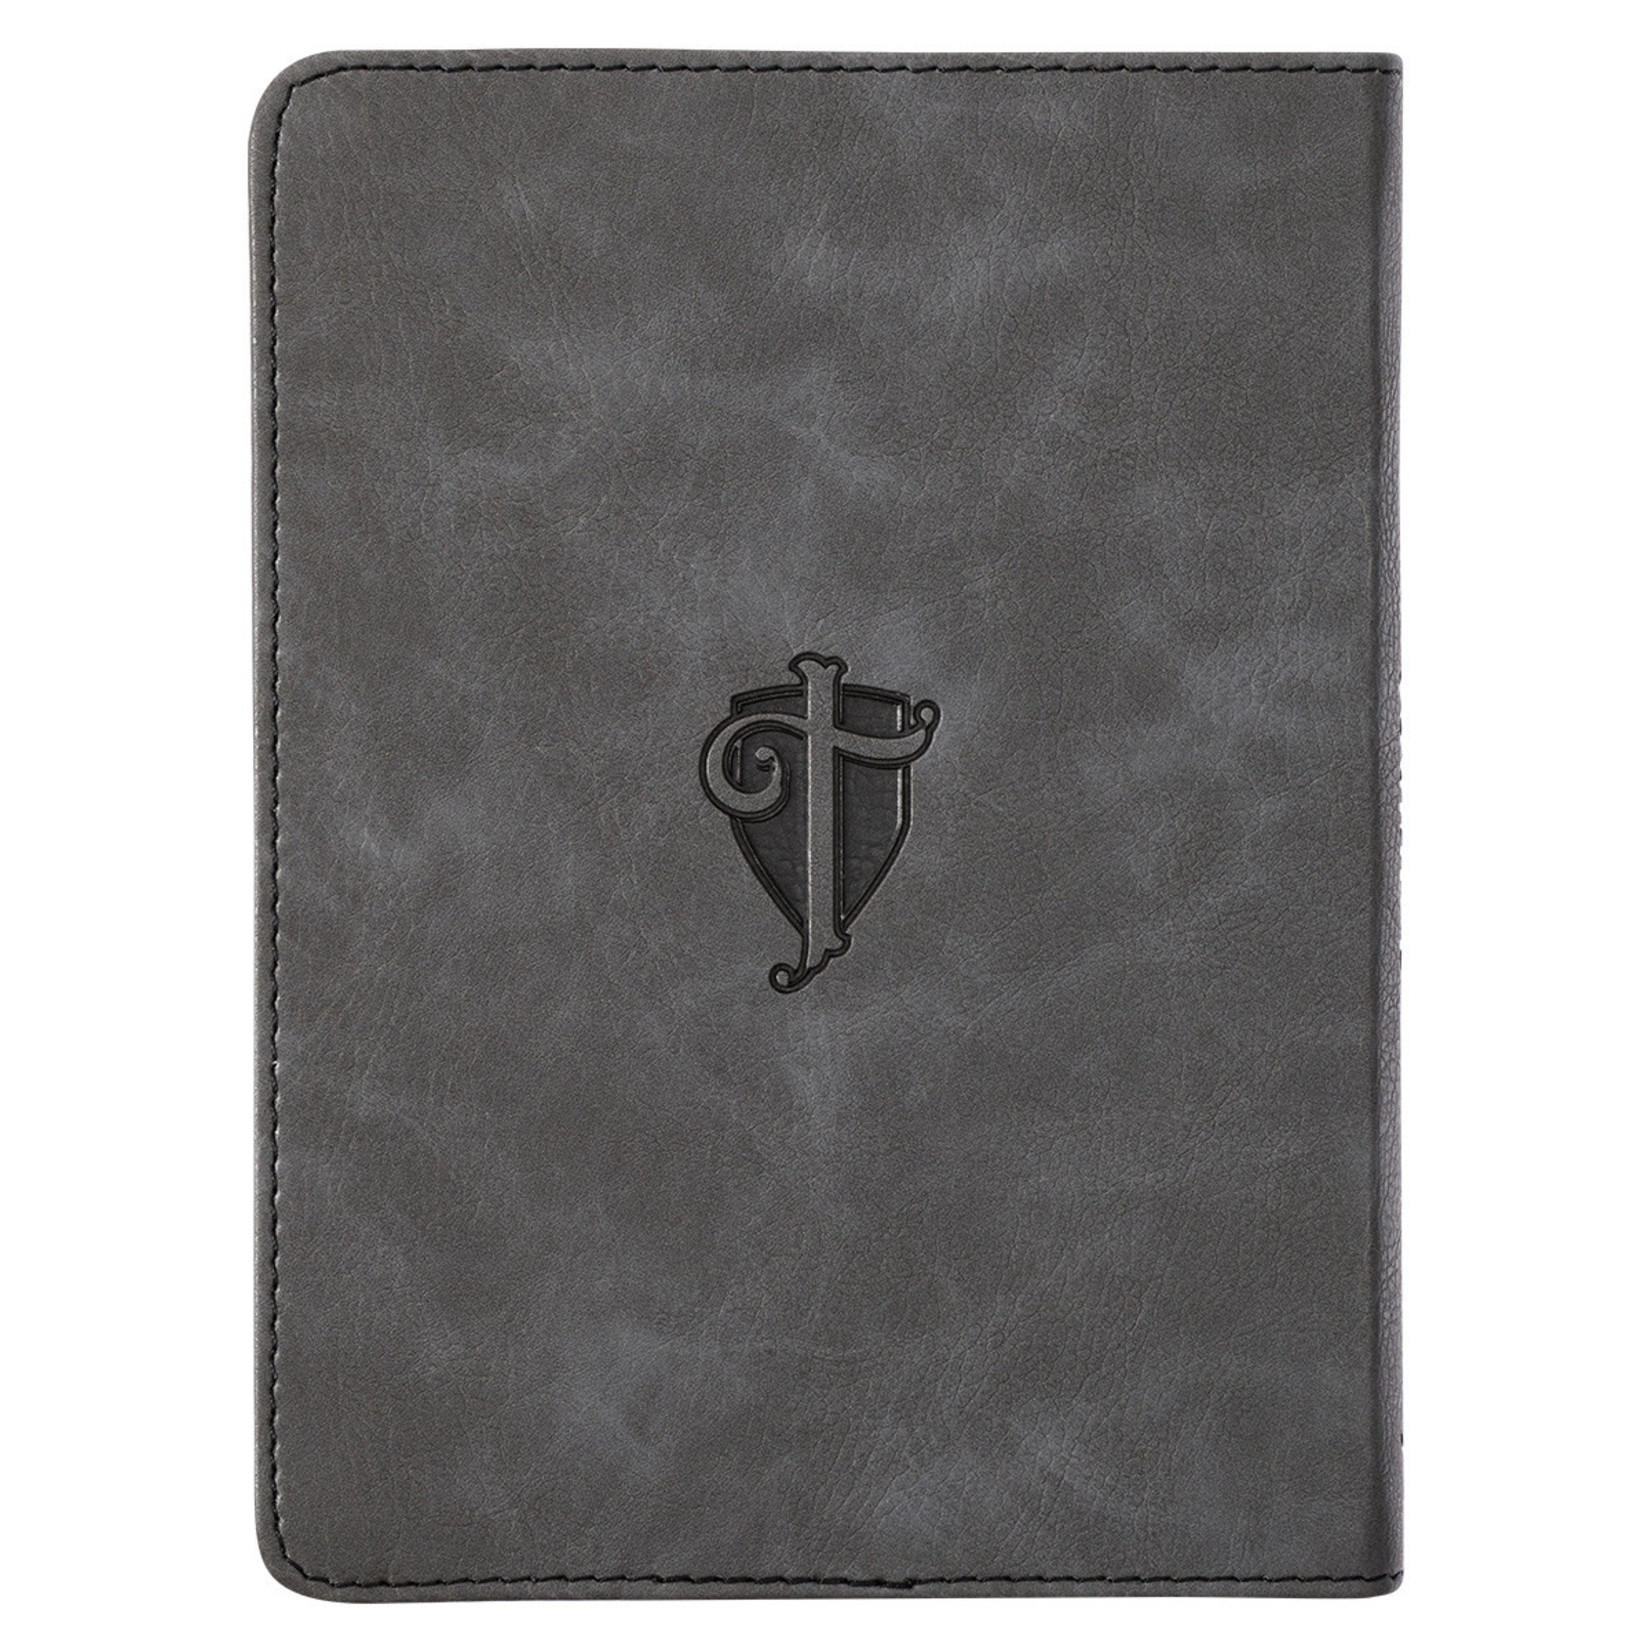 Christian Art Gifts Trust in the Lord Gray Faux Leather Handy-sized Journal - Proverbs 3:5